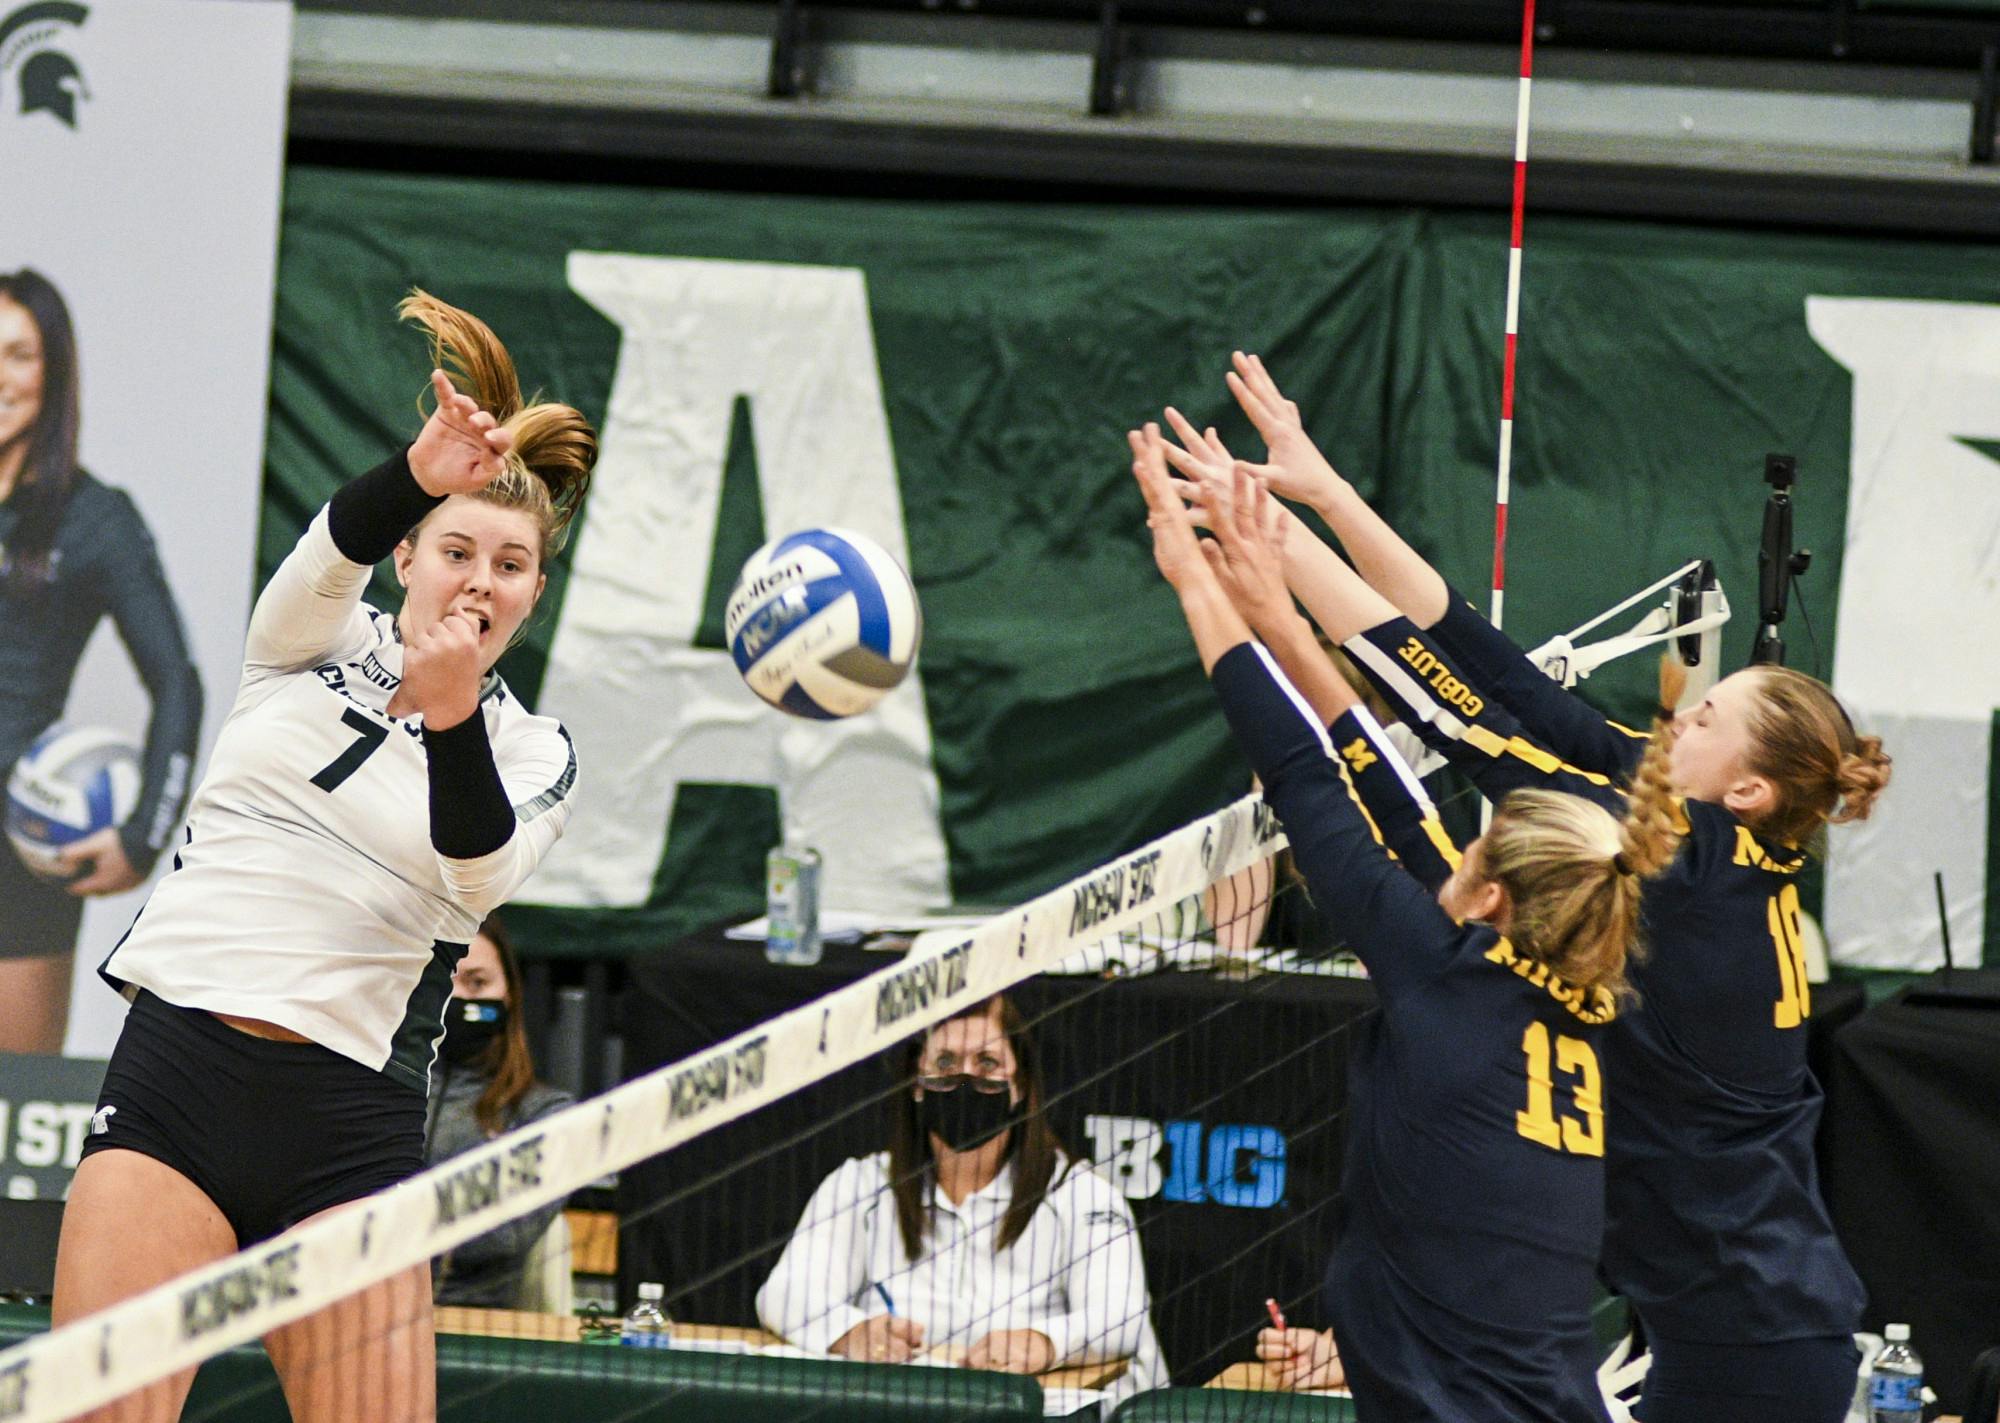 <p>Freshman outside hitter Sarah Franklin (7) attempts to hit the ball during the game against Michigan on Feb. 17, 2021 at the Jenison Fieldhouse. The Wolverines defeated the Spartans 3-1.</p>